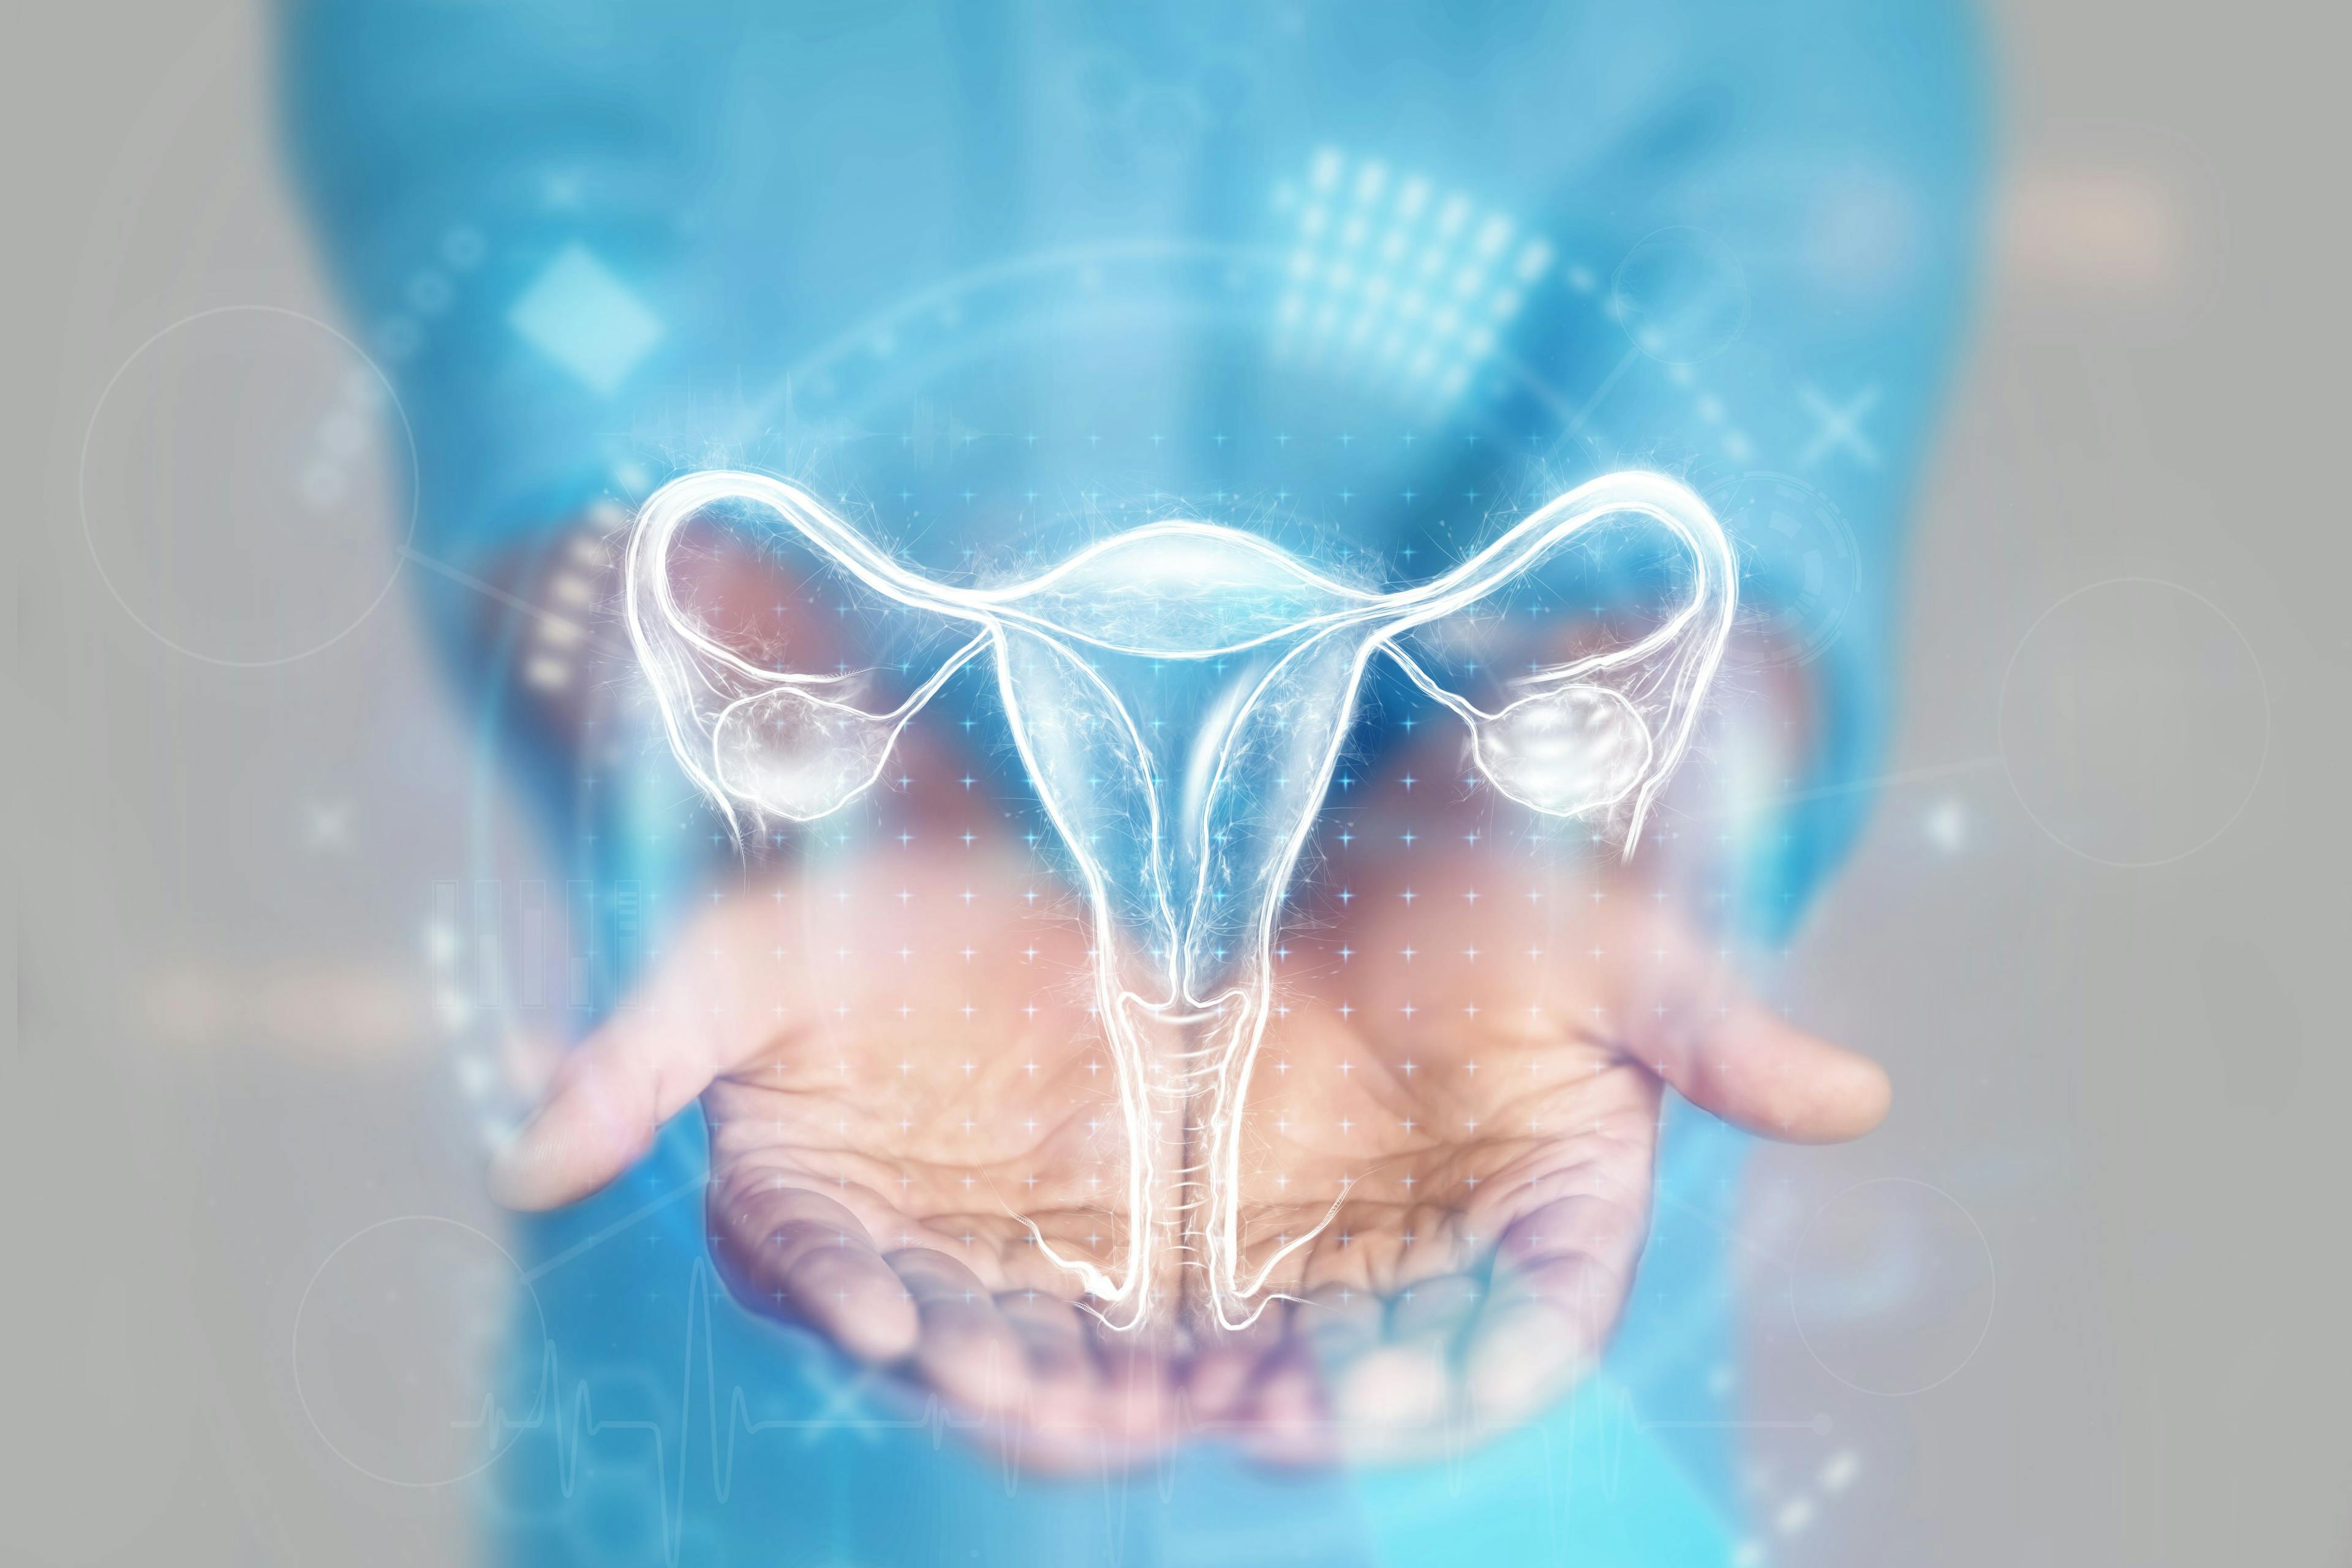 Medical concept, doctor's hands in a blue coat close-up. Ultrasound of the uterus, x-ray, hologram. © Aliaksandr Marko - stock.adobe.com